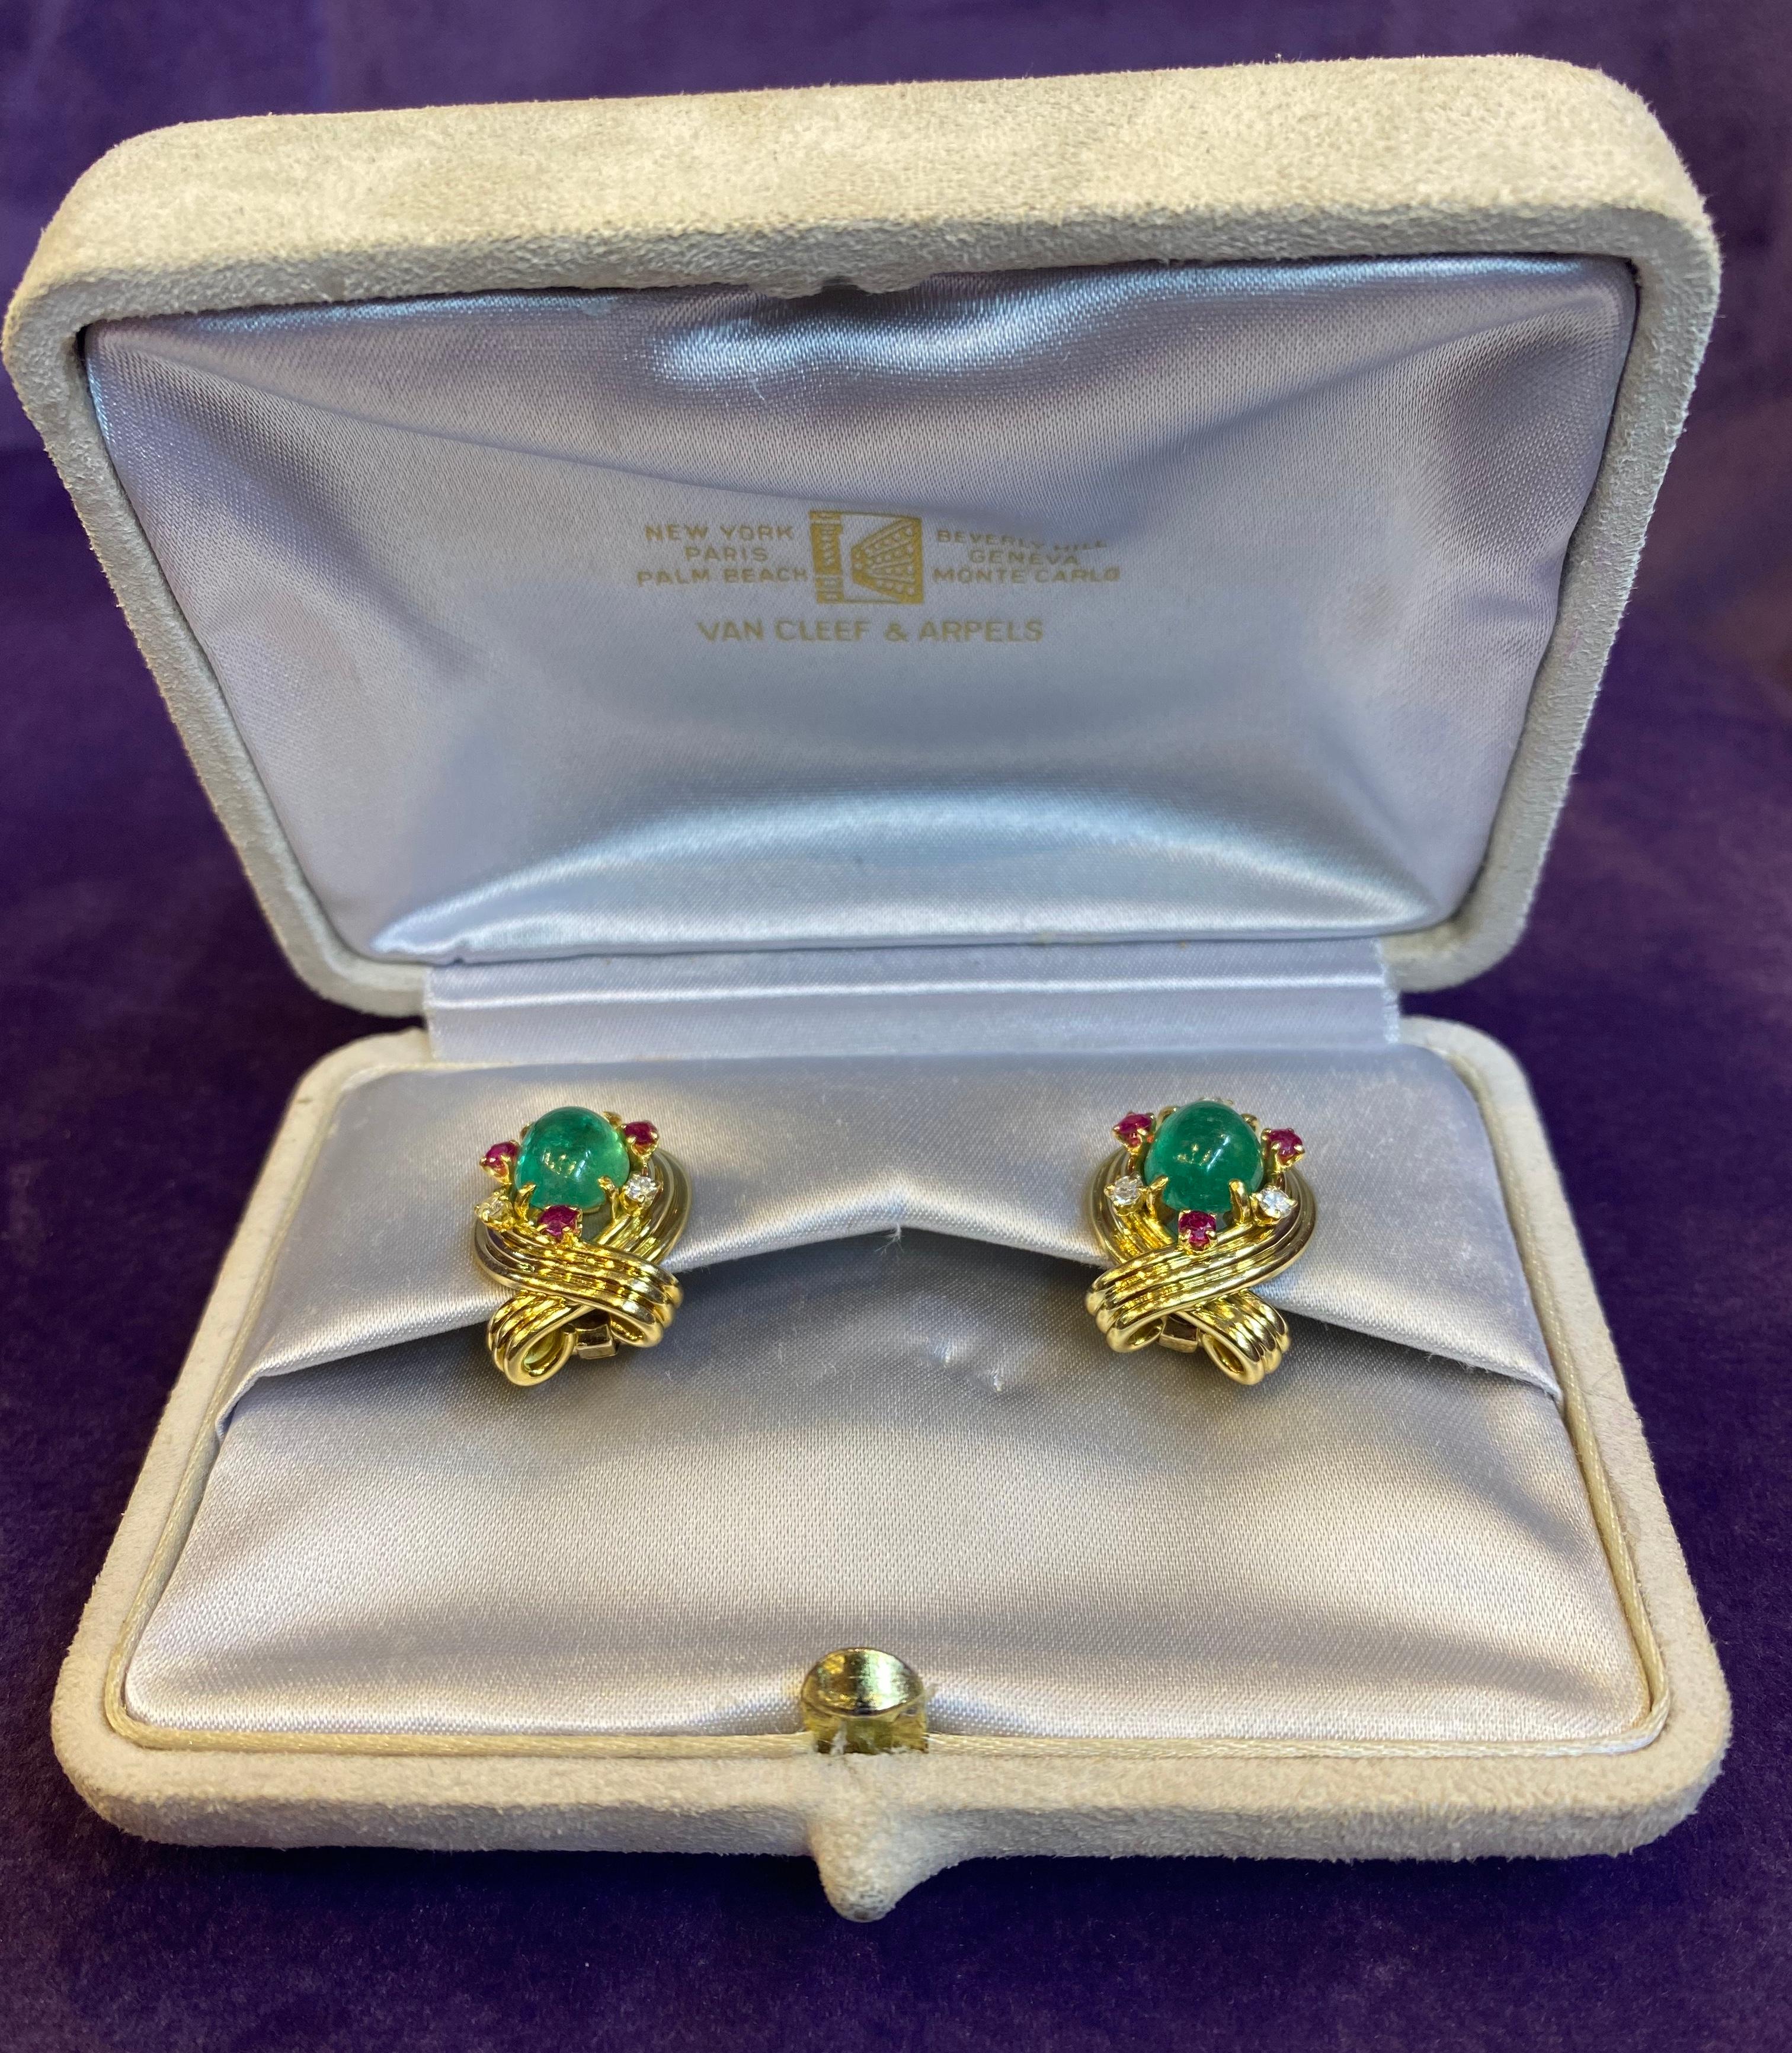 Cabochon Emerald and Ruby Earrings by Van Cleef & Arpels For Sale 1